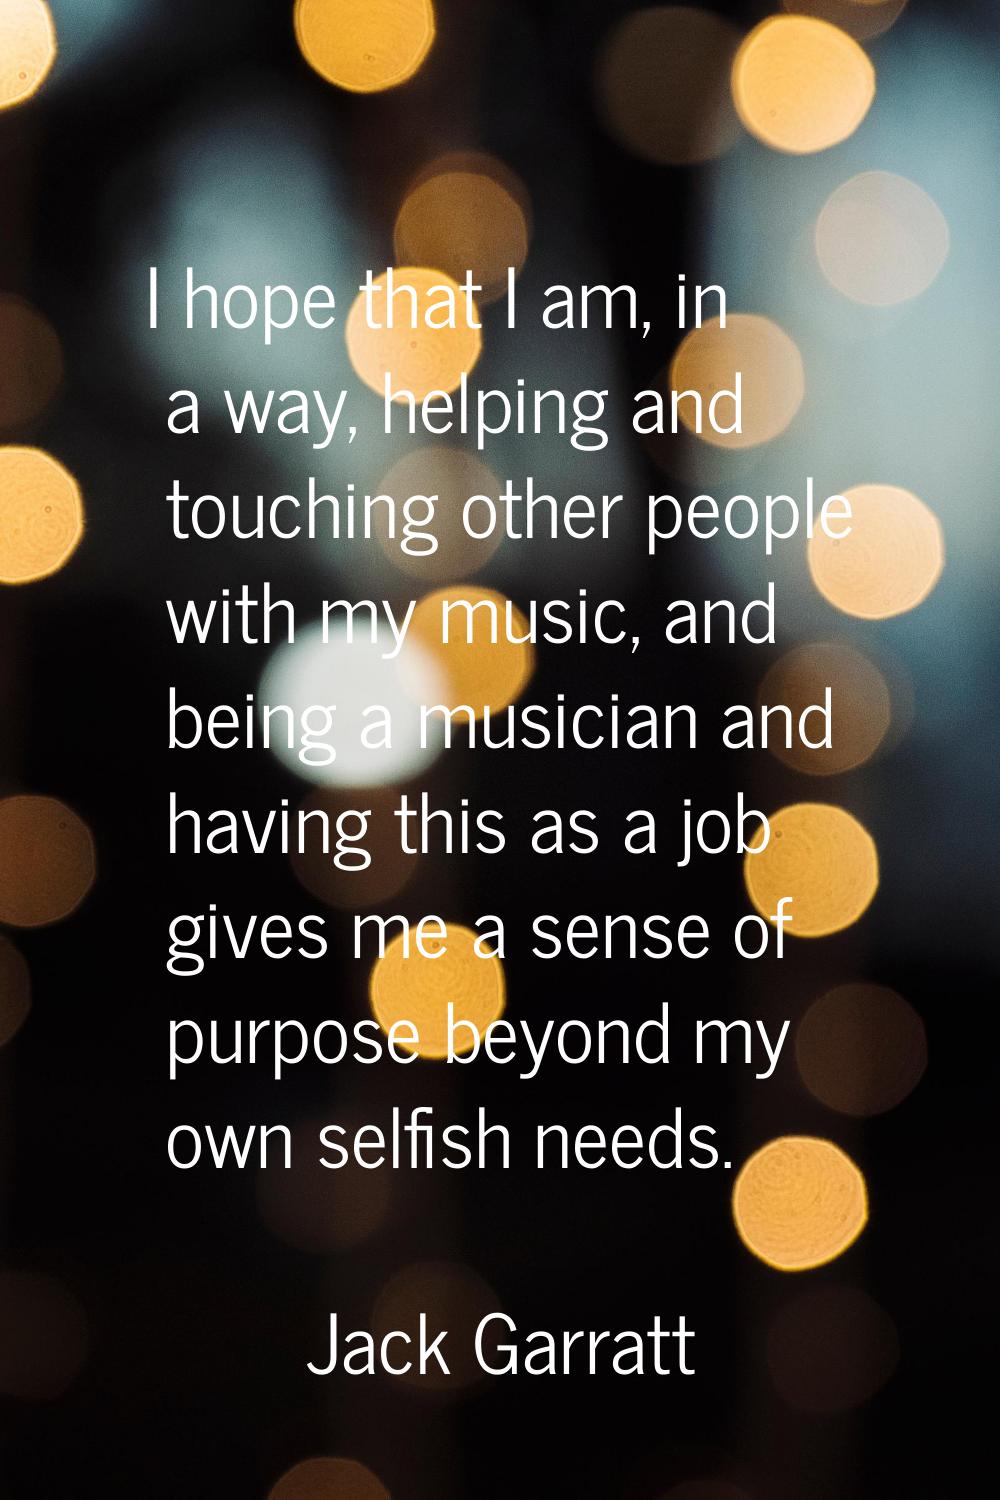 I hope that I am, in a way, helping and touching other people with my music, and being a musician a